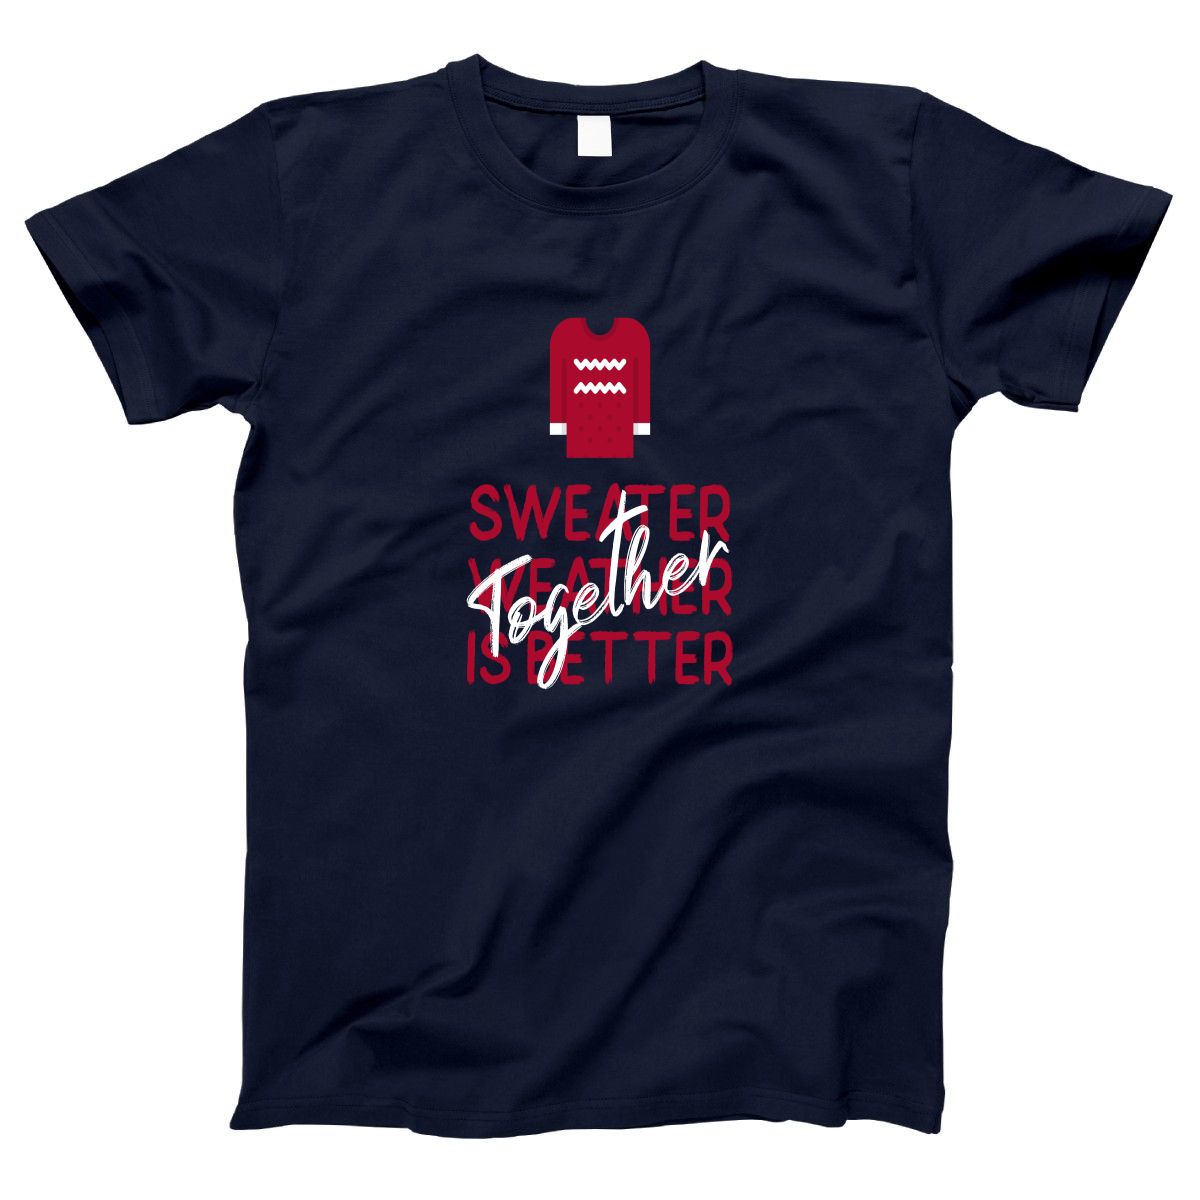 Sweather Weather is Better Together Women's T-shirt | Navy